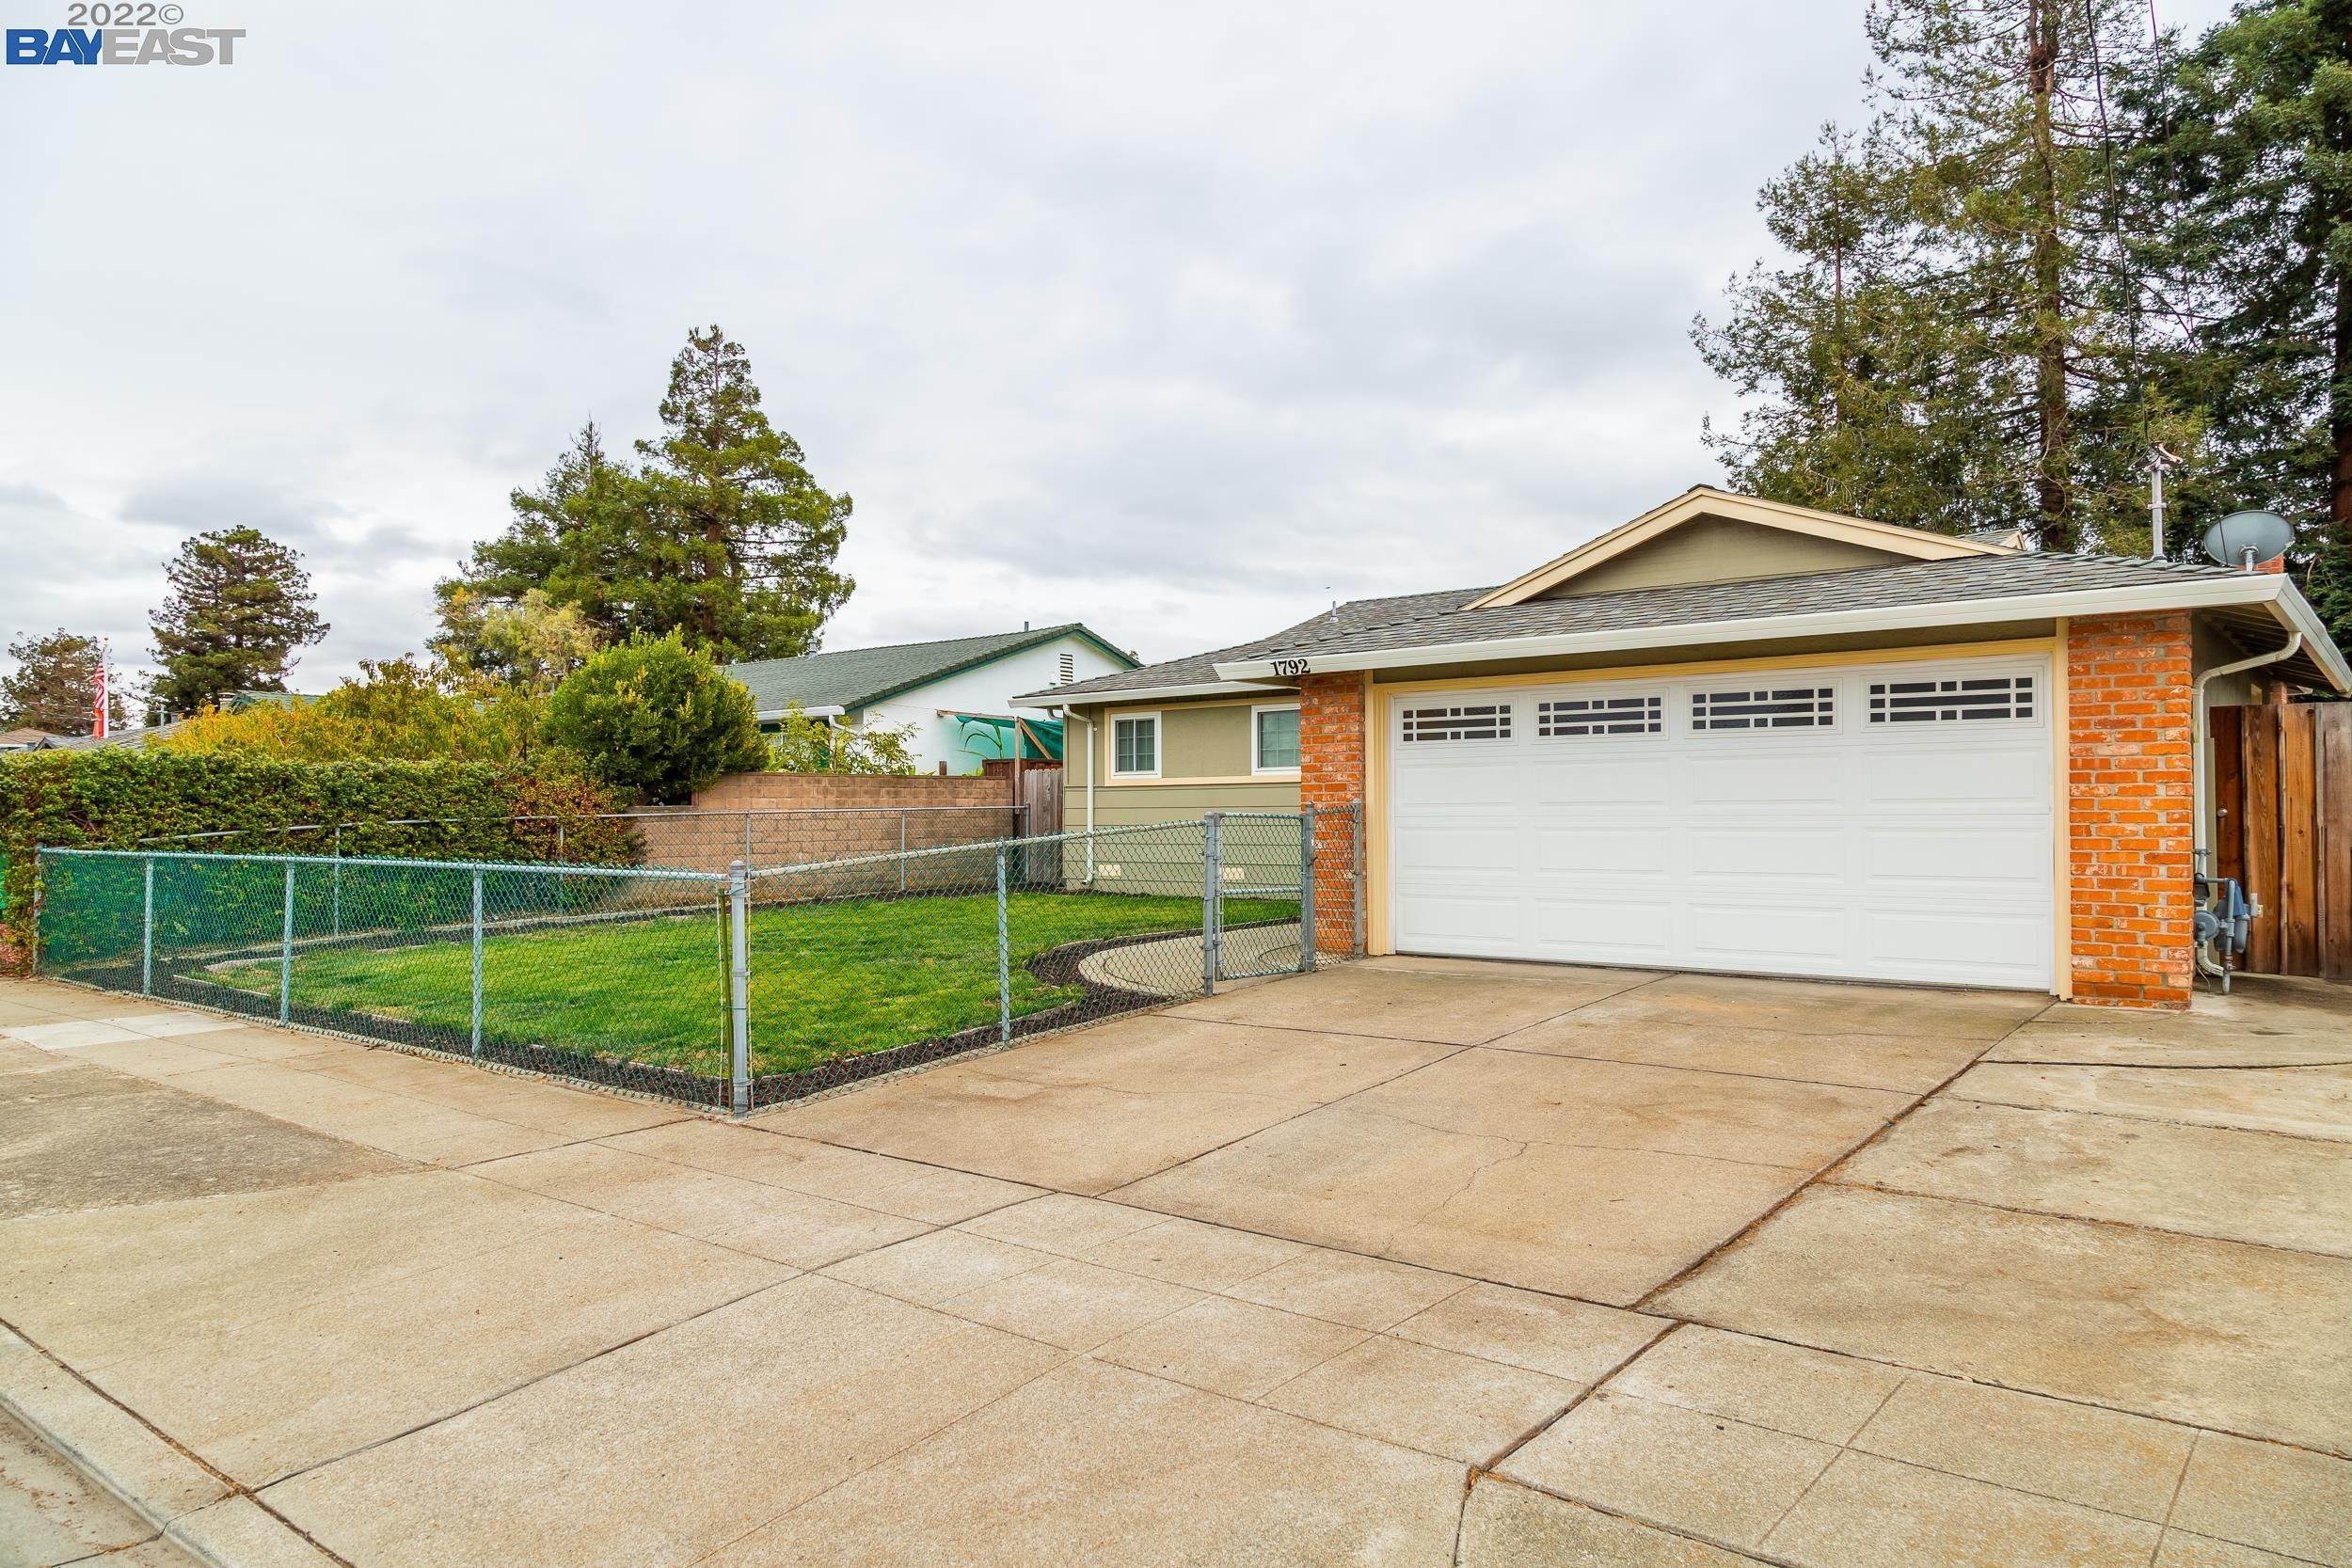 1. Single Family for Sale at Hayward, CA 94545